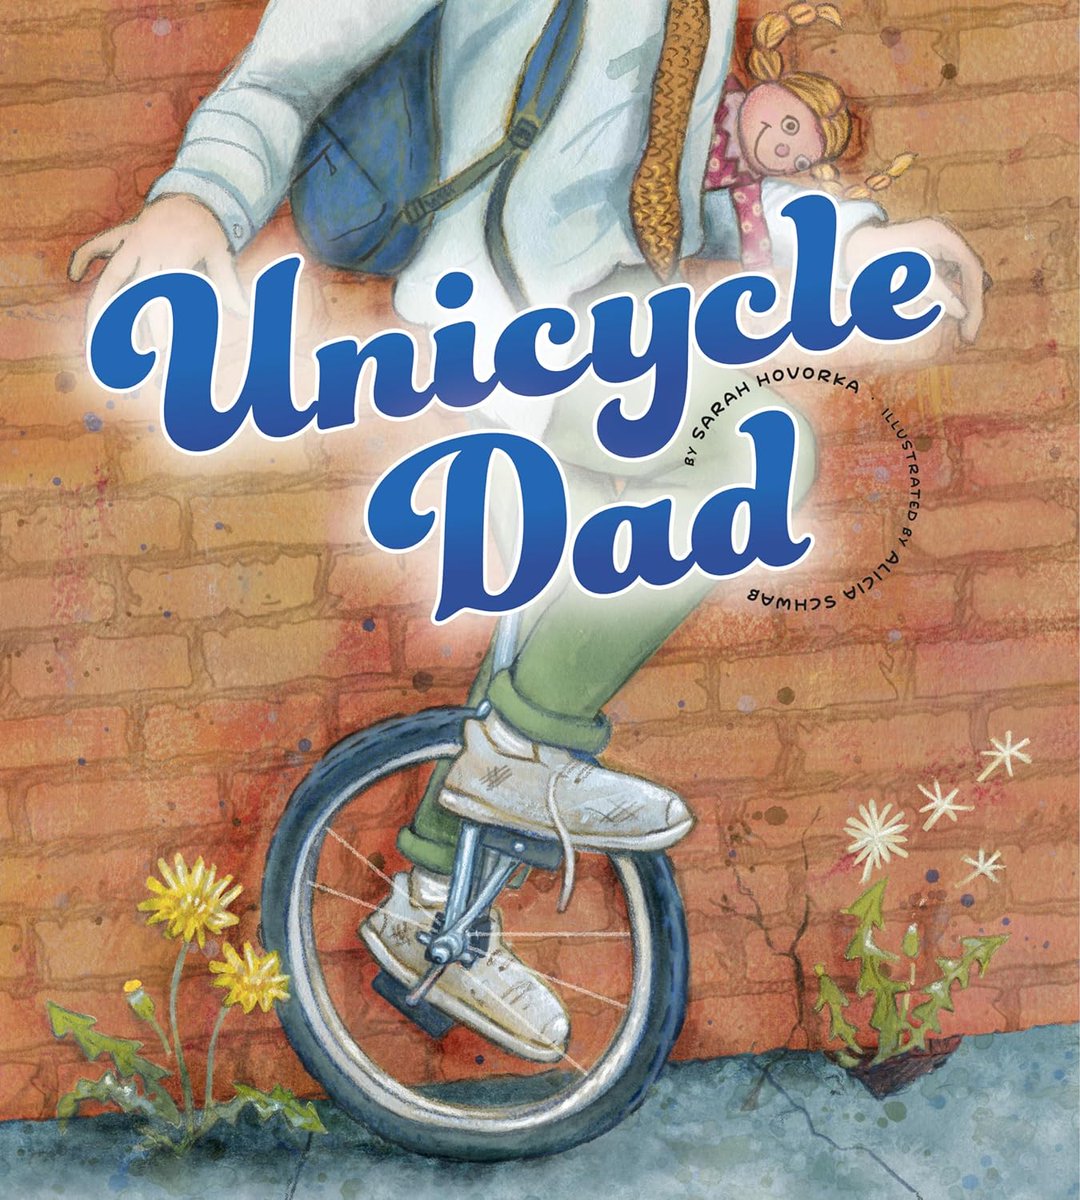 Discover this honest, heartfelt ode to dads & families and the power of perseverance and resilience in overcoming obstacles. #PPBF mariacmarshall.com/single-post/un… @HovorkaSarah @aschwabart @amicuspub #kidlit